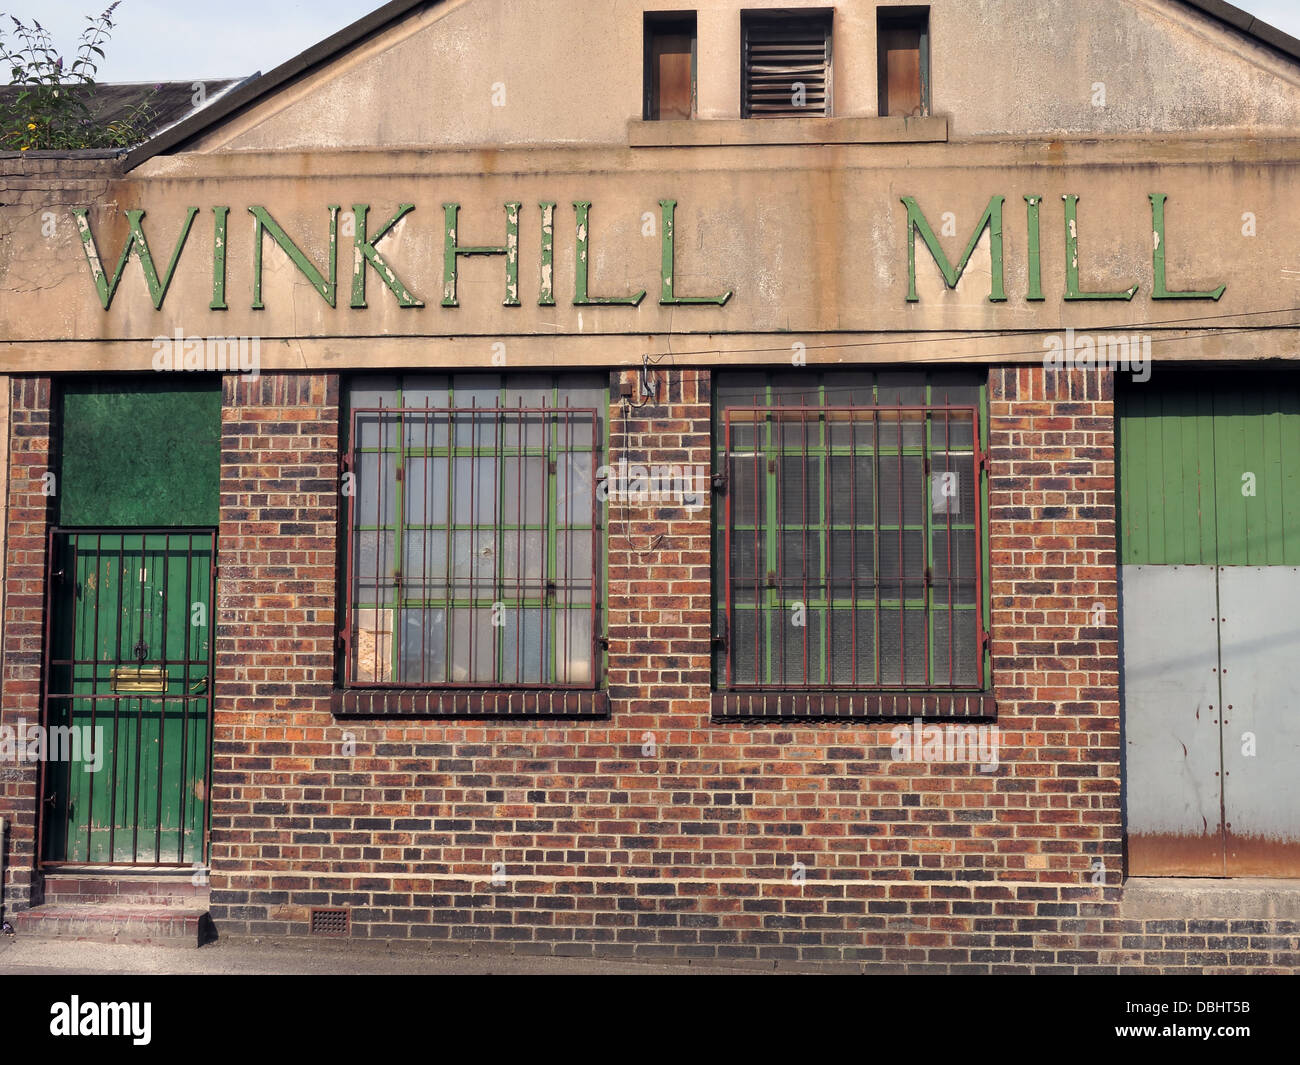 Winkhill Mill, Swan St, Stoke-on-Trent, Staffordshire, Angleterre, ROYAUME-UNI, ST4 7RH Banque D'Images